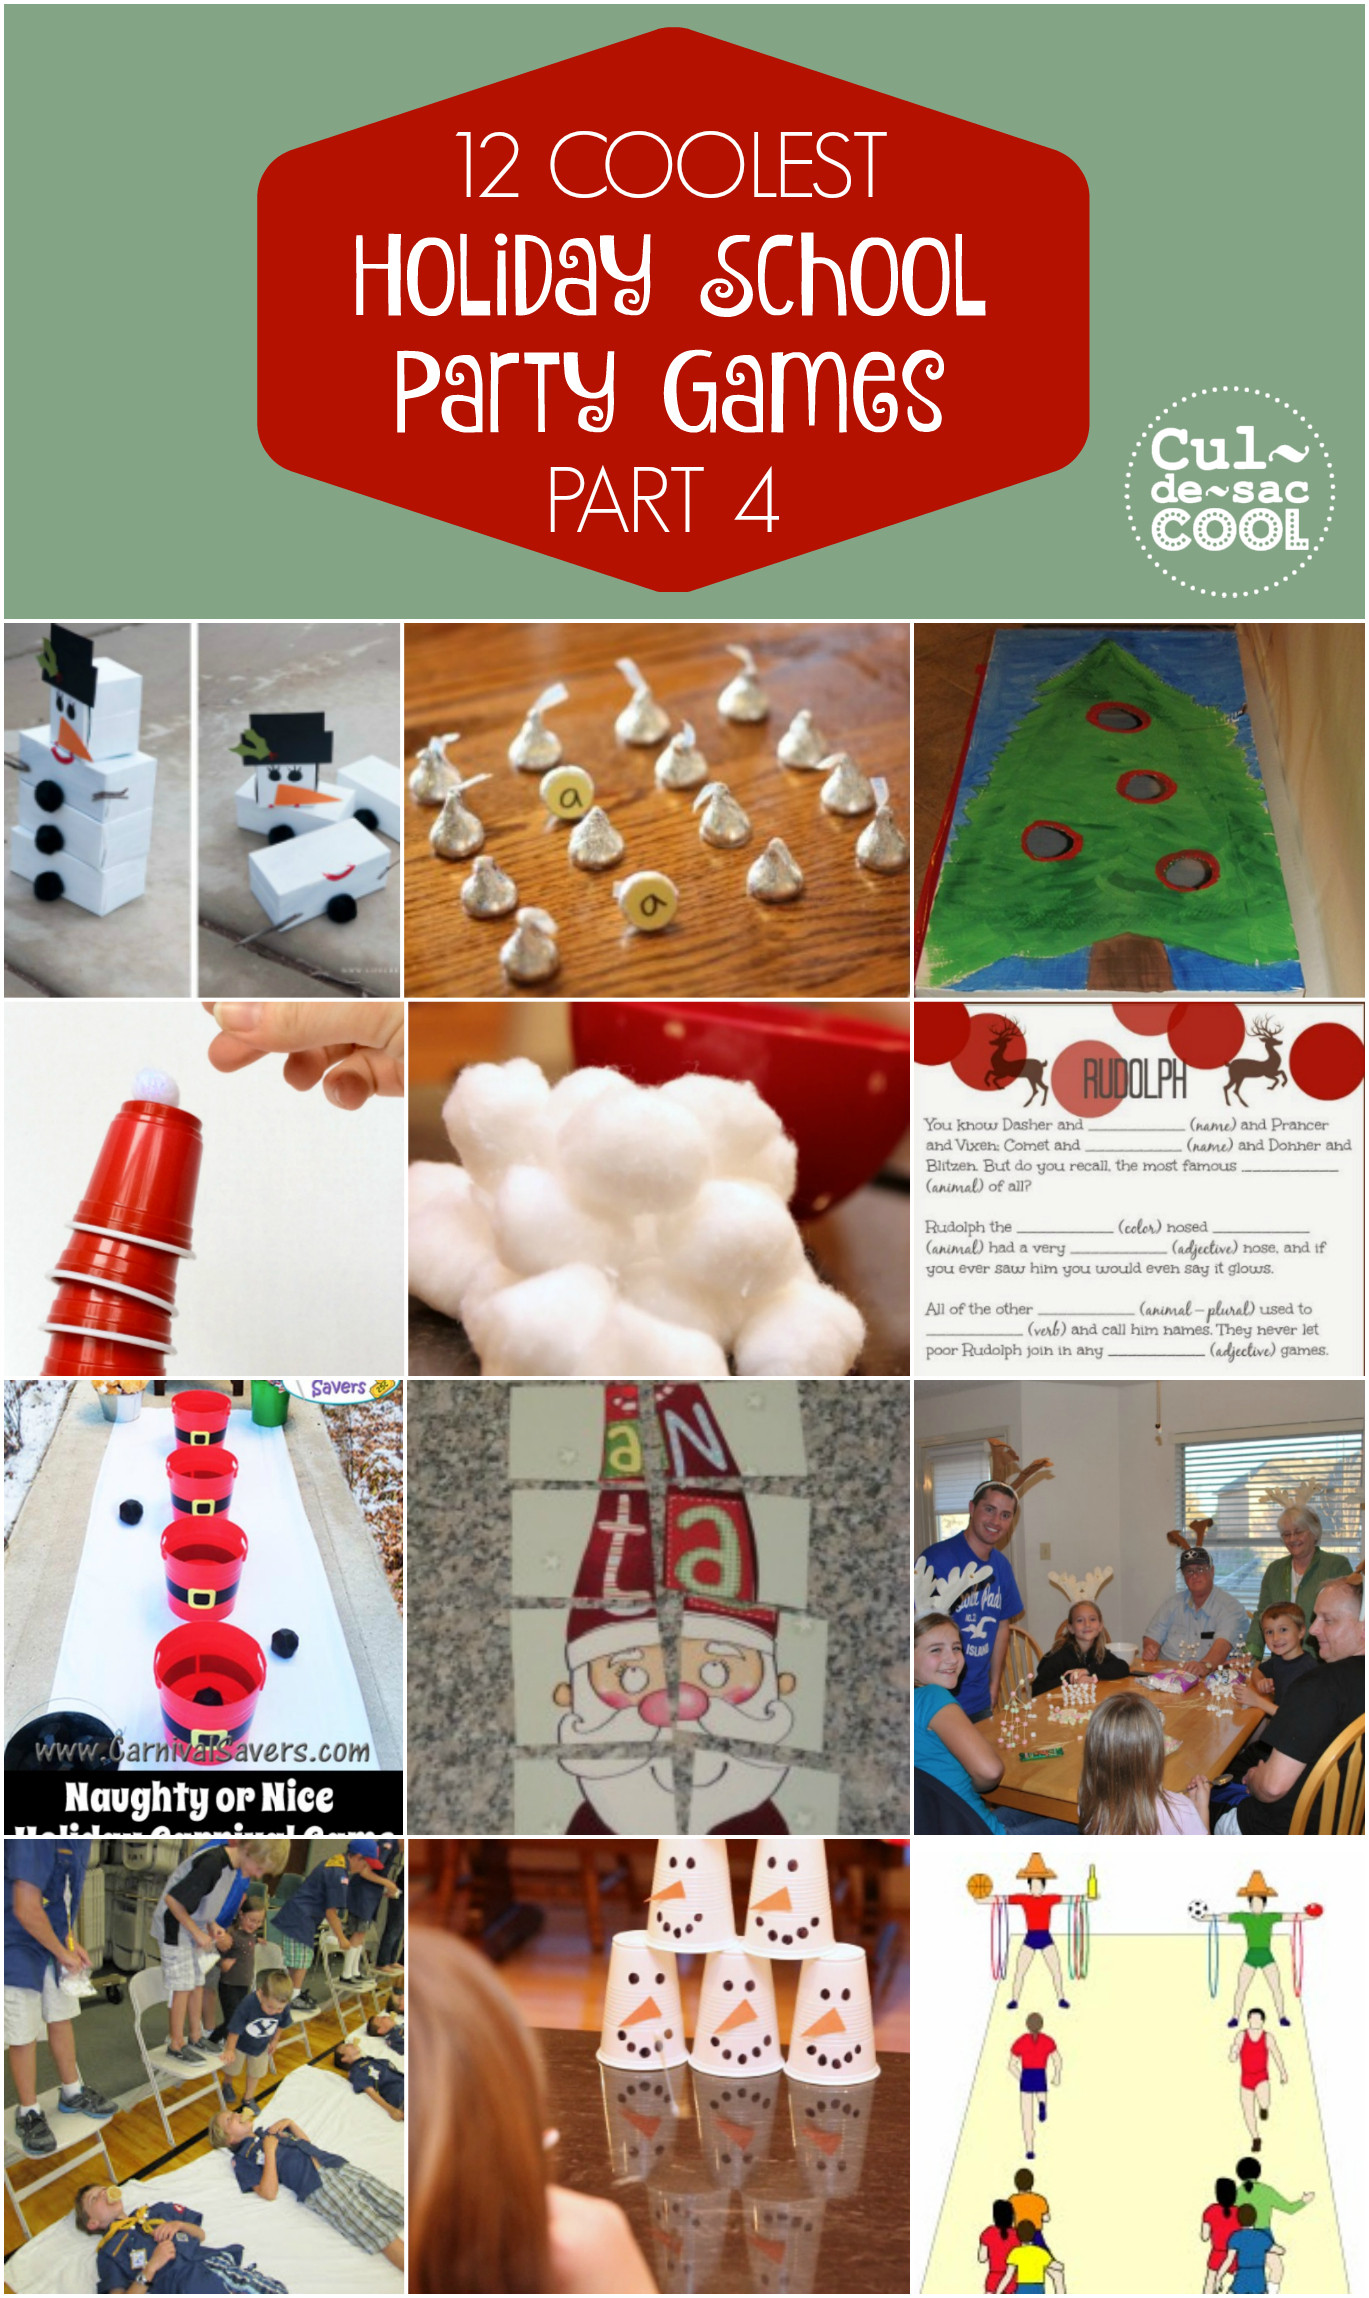 Kindergarten Holiday Party Ideas
 12 COOLEST HOLIDAY SCHOOL PARTY GAMES — PART 4